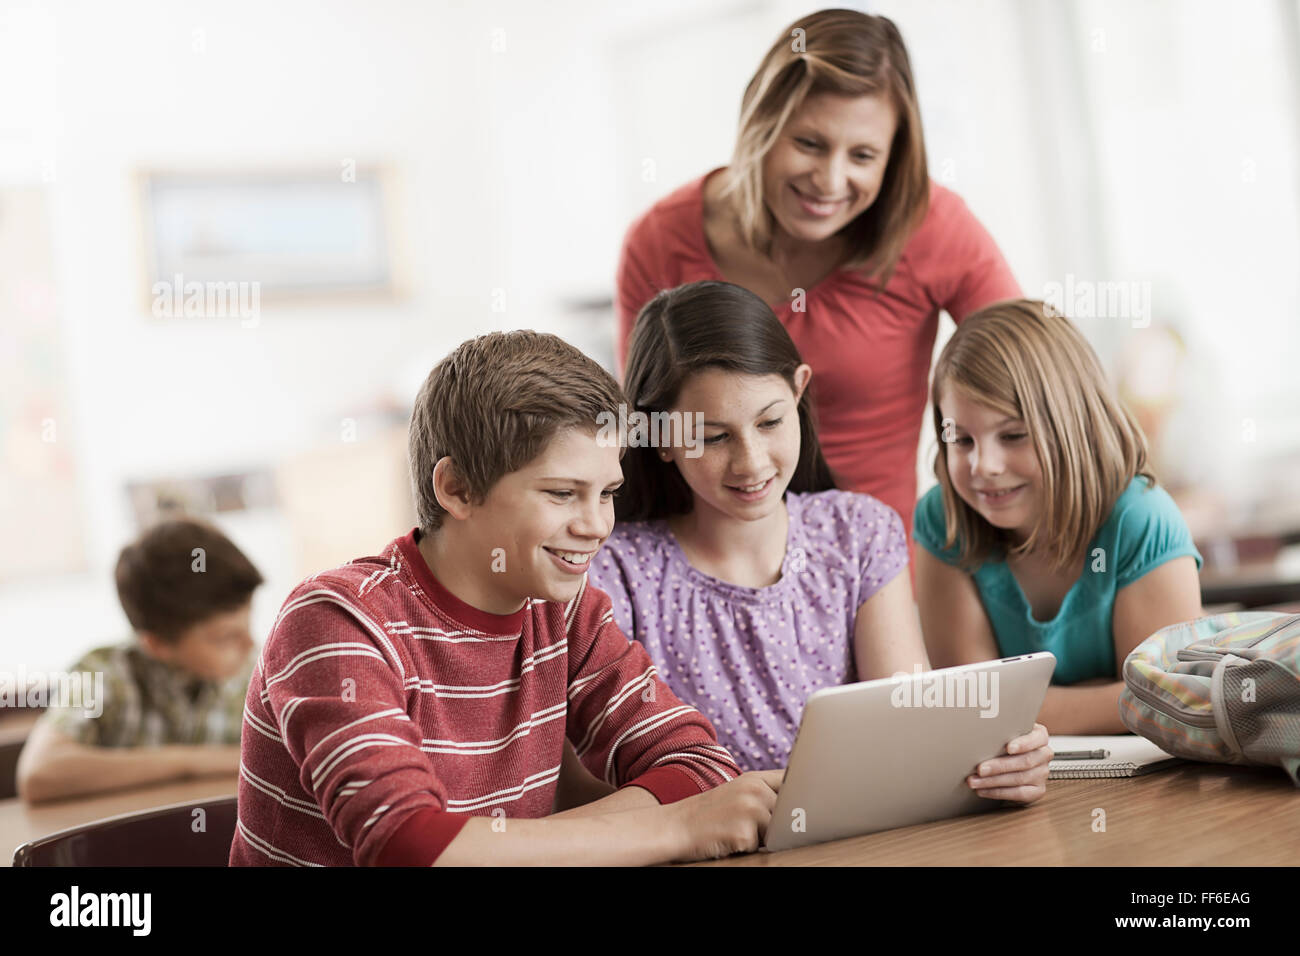 A group of students in class and an adult teacher looking at a digital tablet. Stock Photo